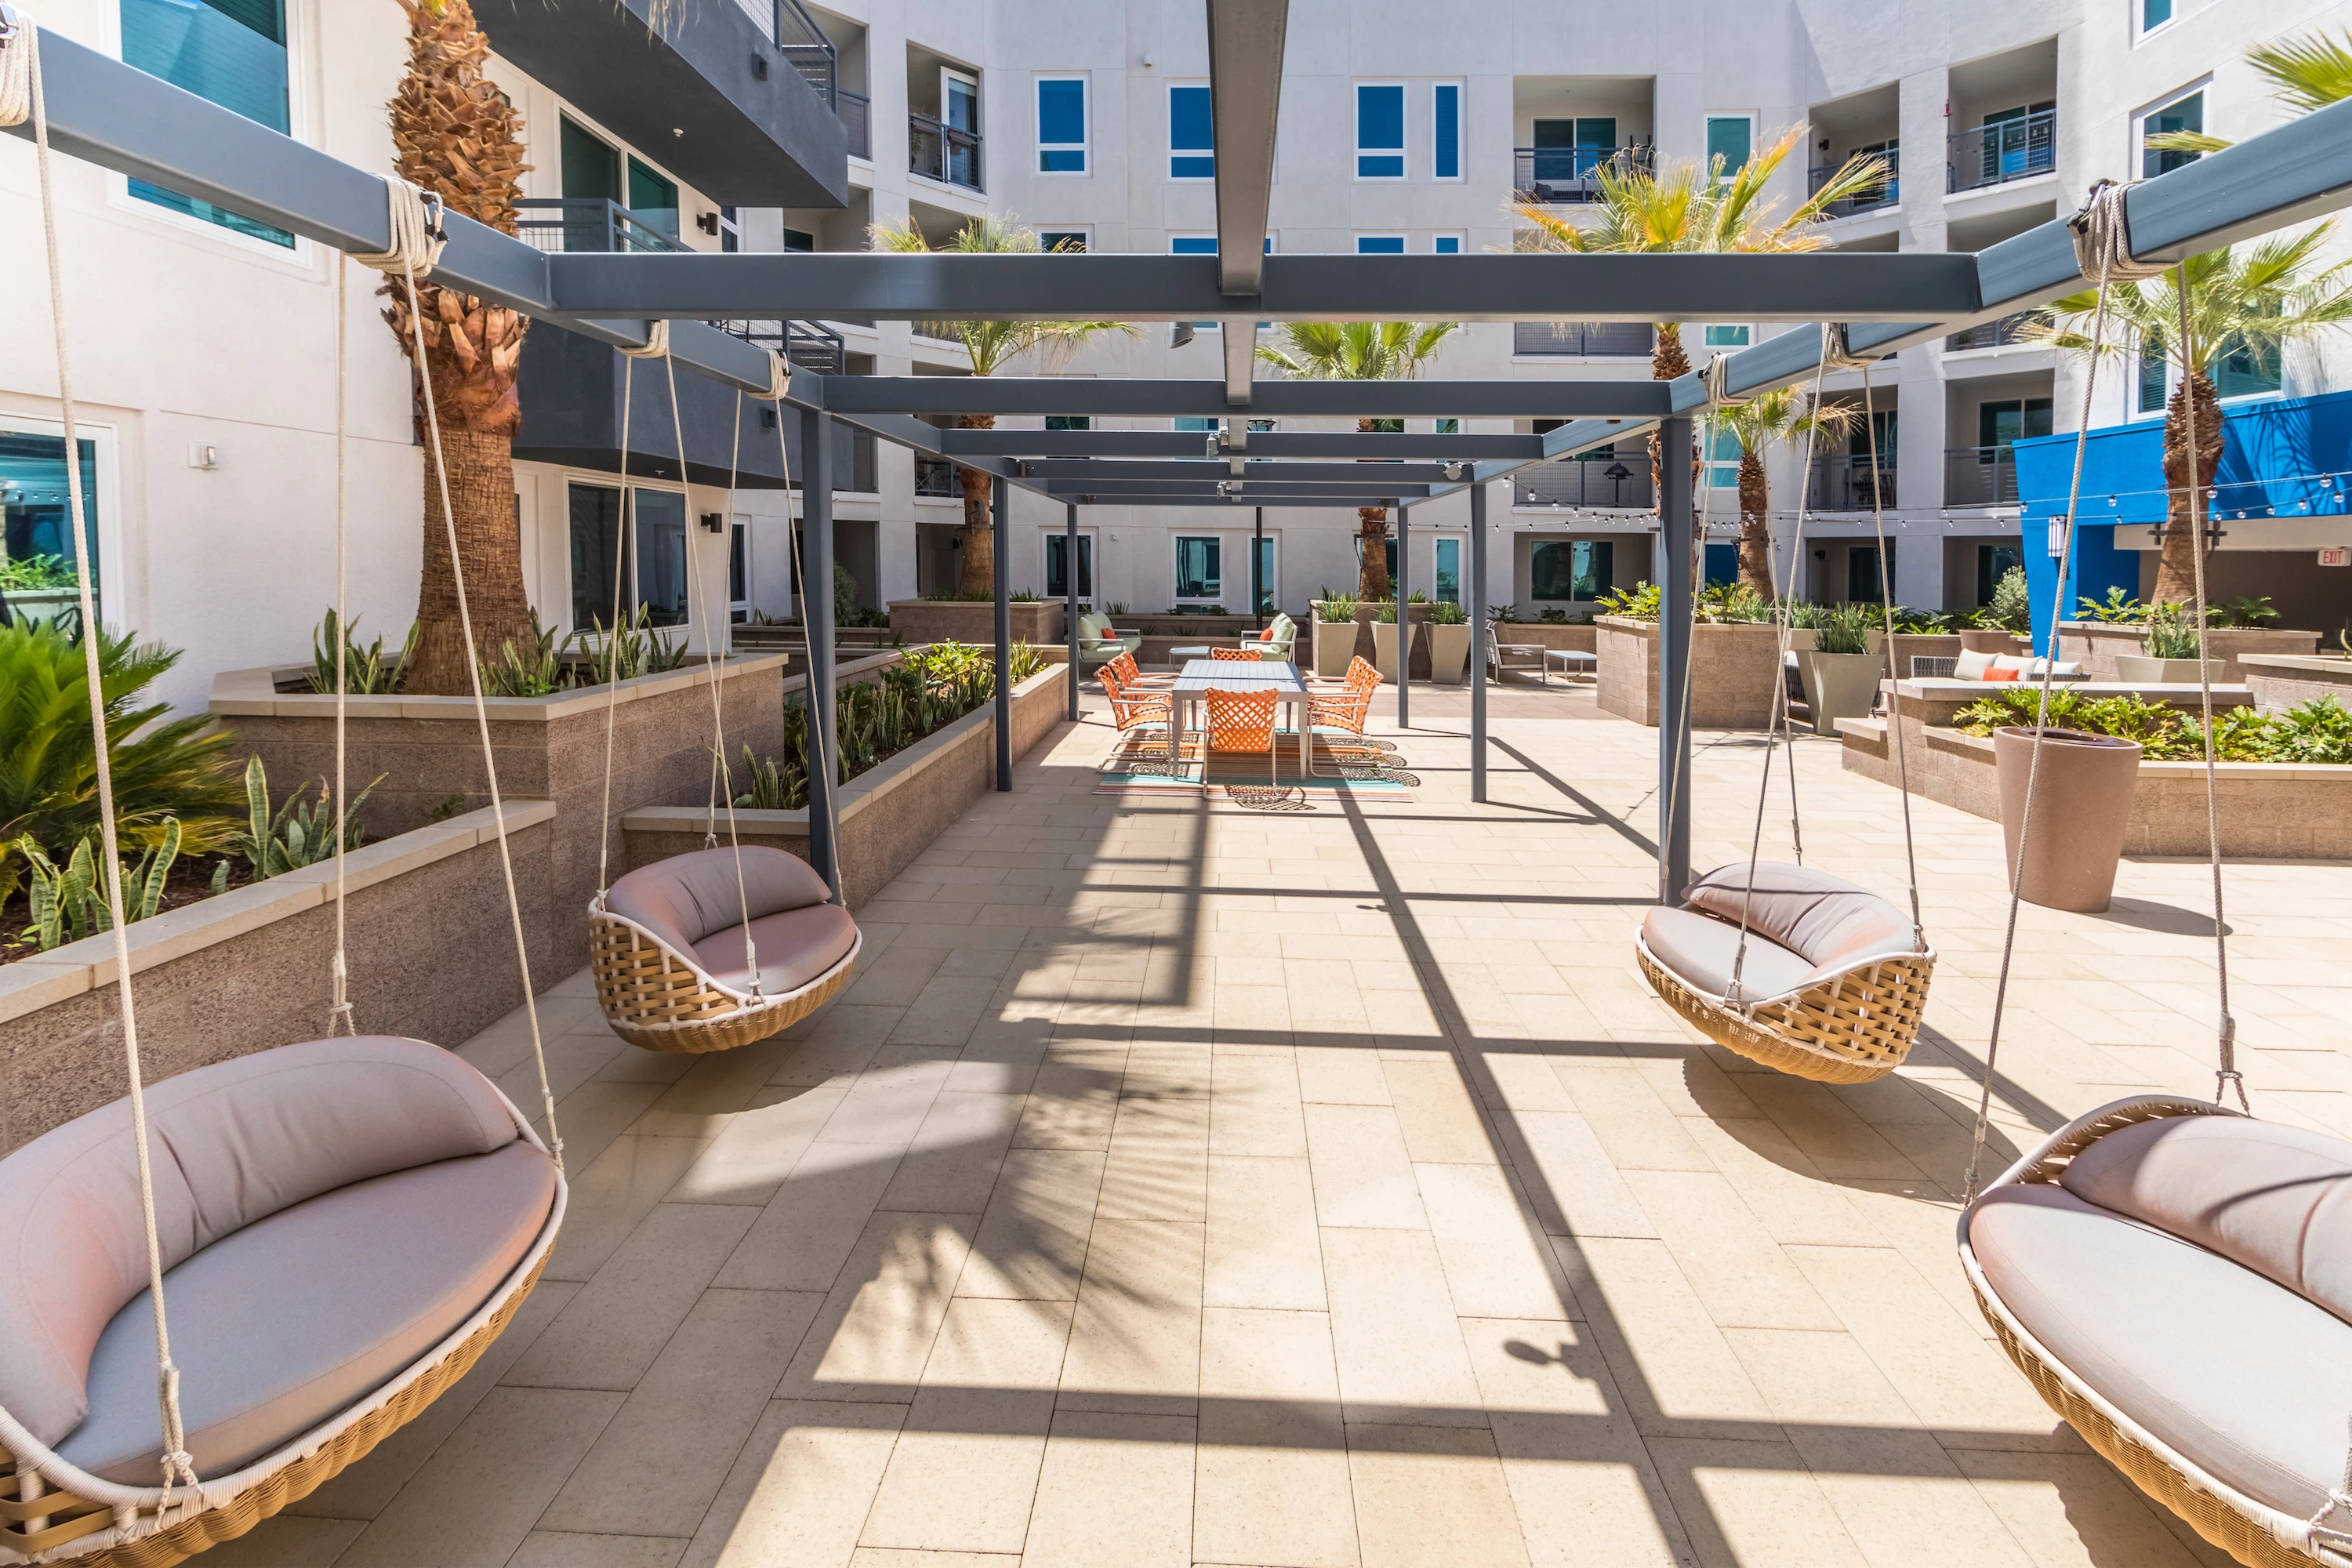 1251-13-exterior-courtyard-swing-seating-at-vela-on-ox-apartments-in-woodland-hills-c.jpg